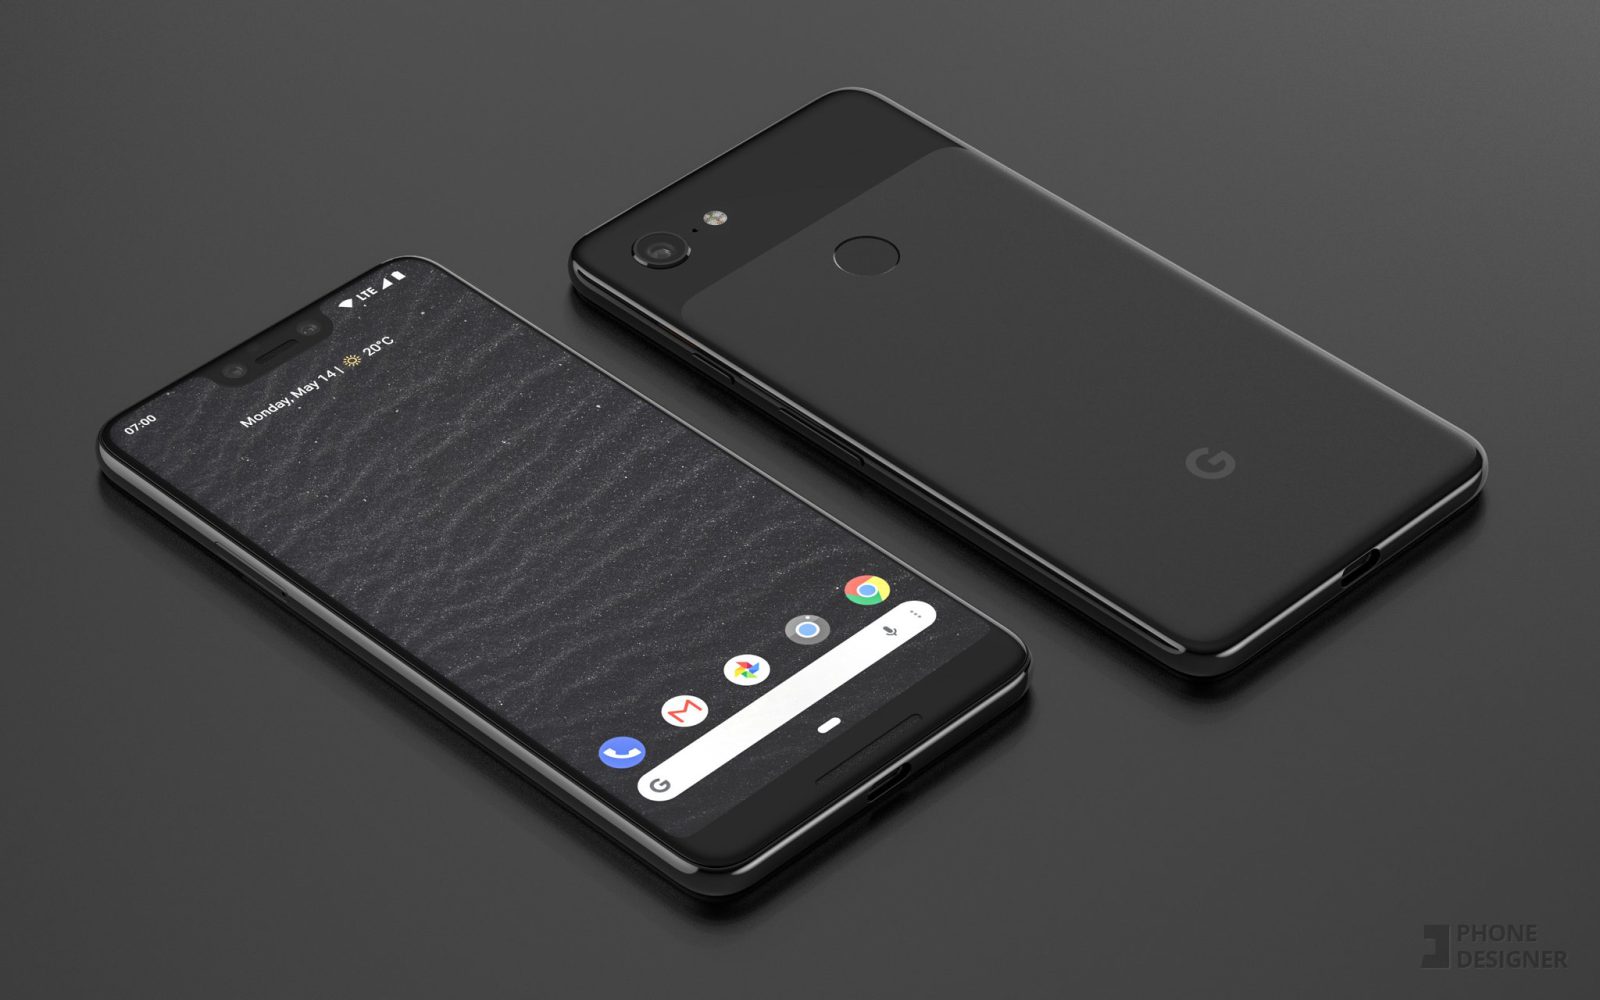 2018 Smartphone Rumor Roundup: Everything we know about the Pixel 3 and iPhone XI